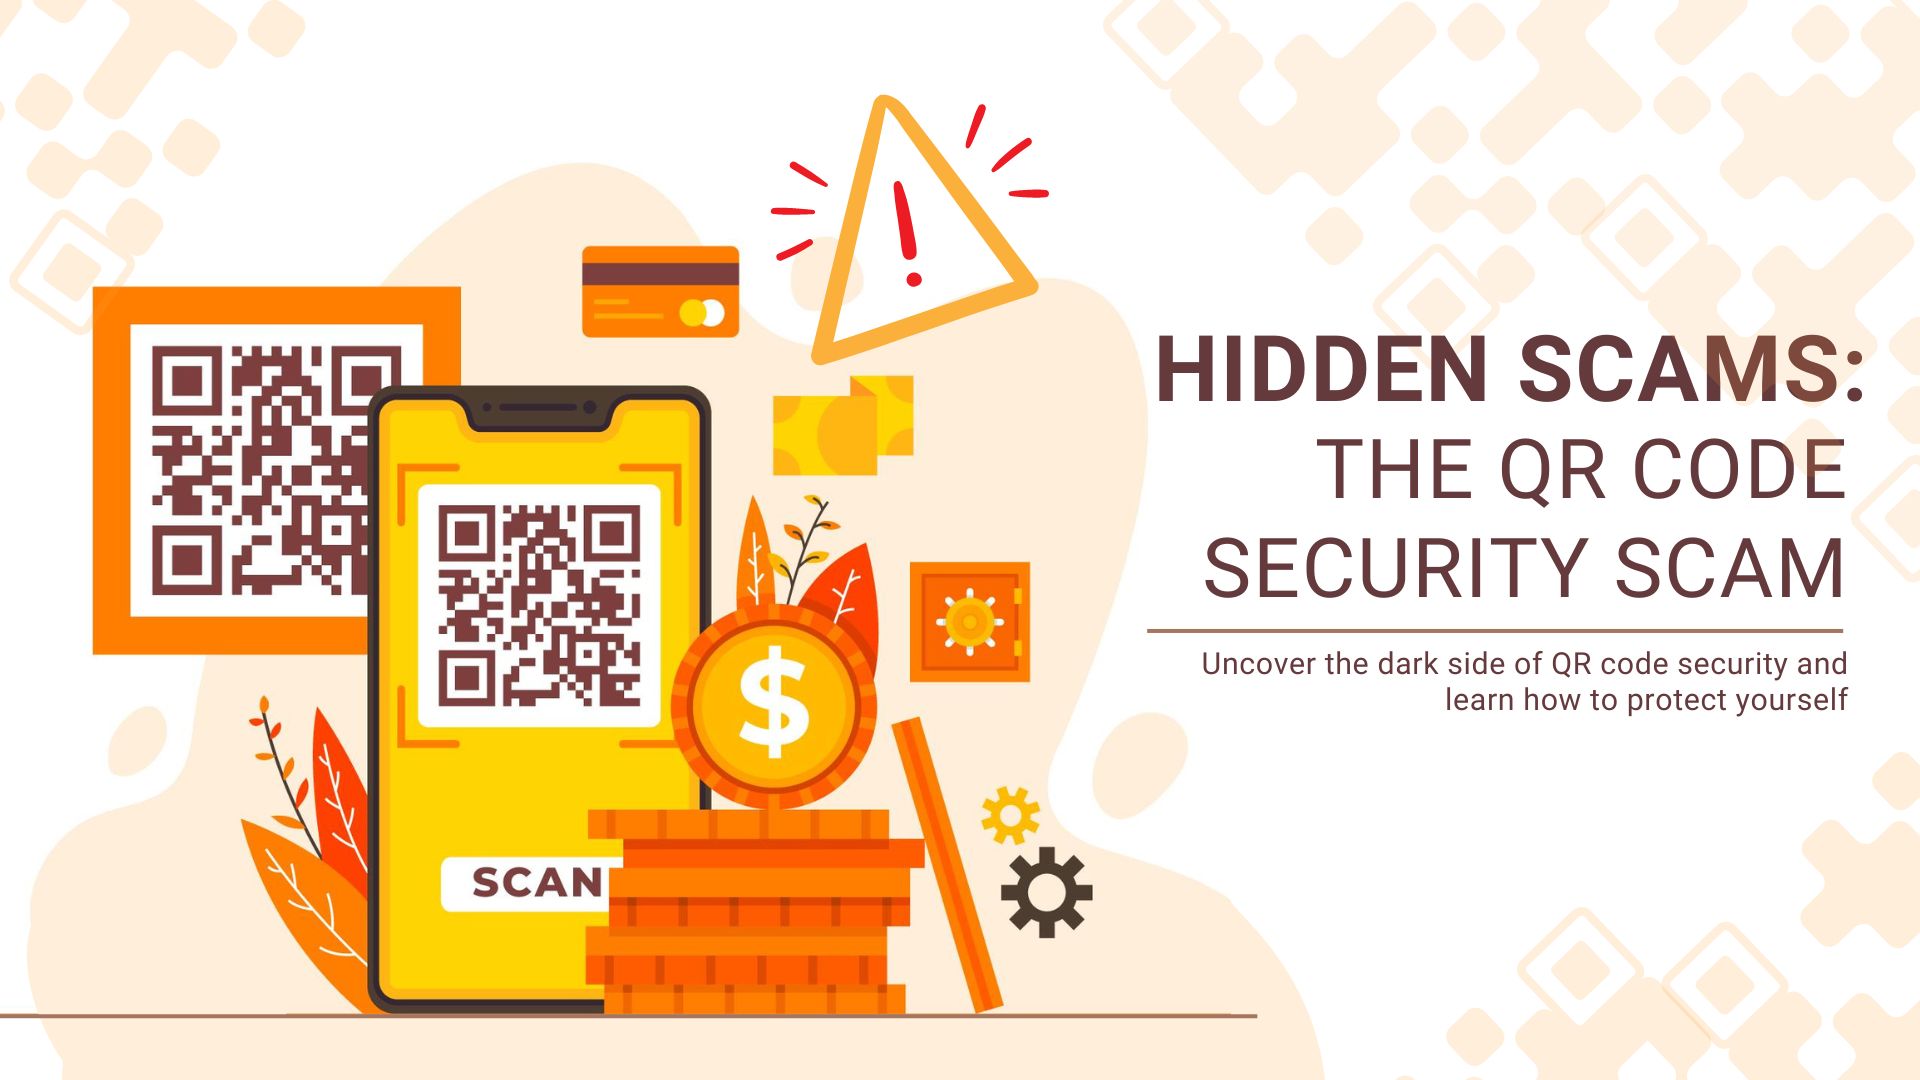 Hidden Scams The QR code Security Scam_Feature image 1